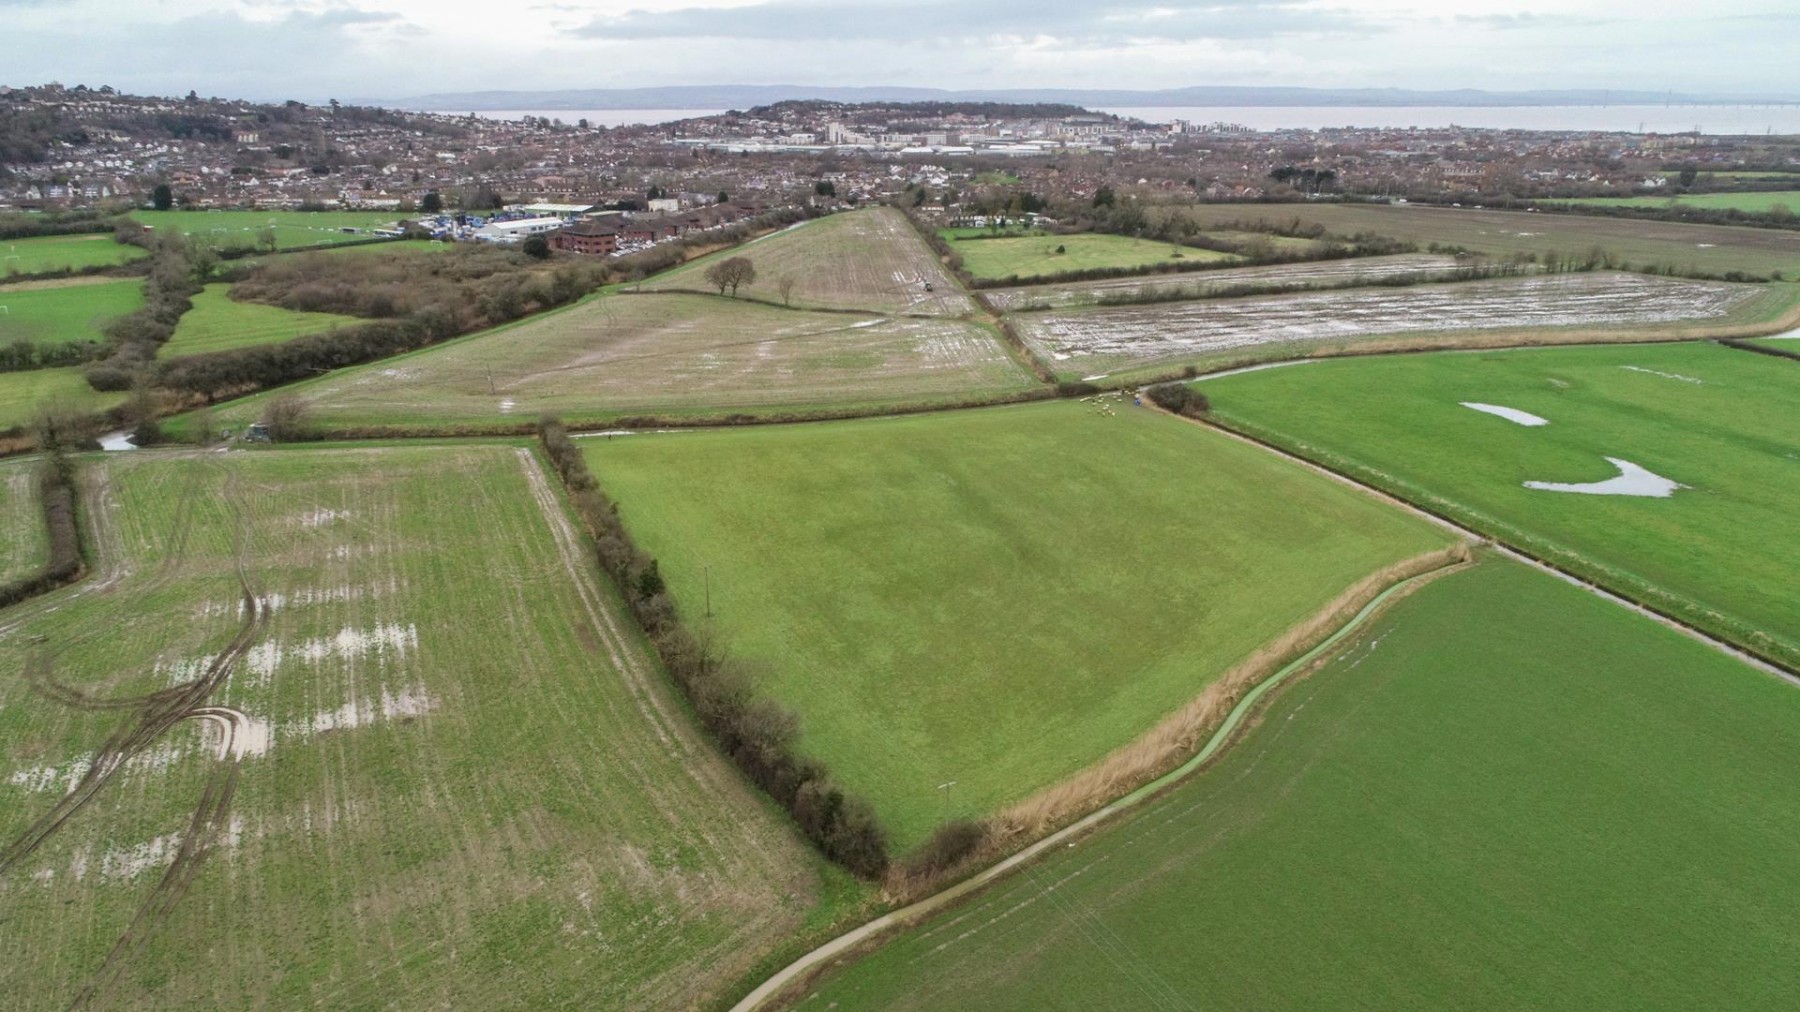 Images for 5 ACRES - CLAPTON IN GORDANO